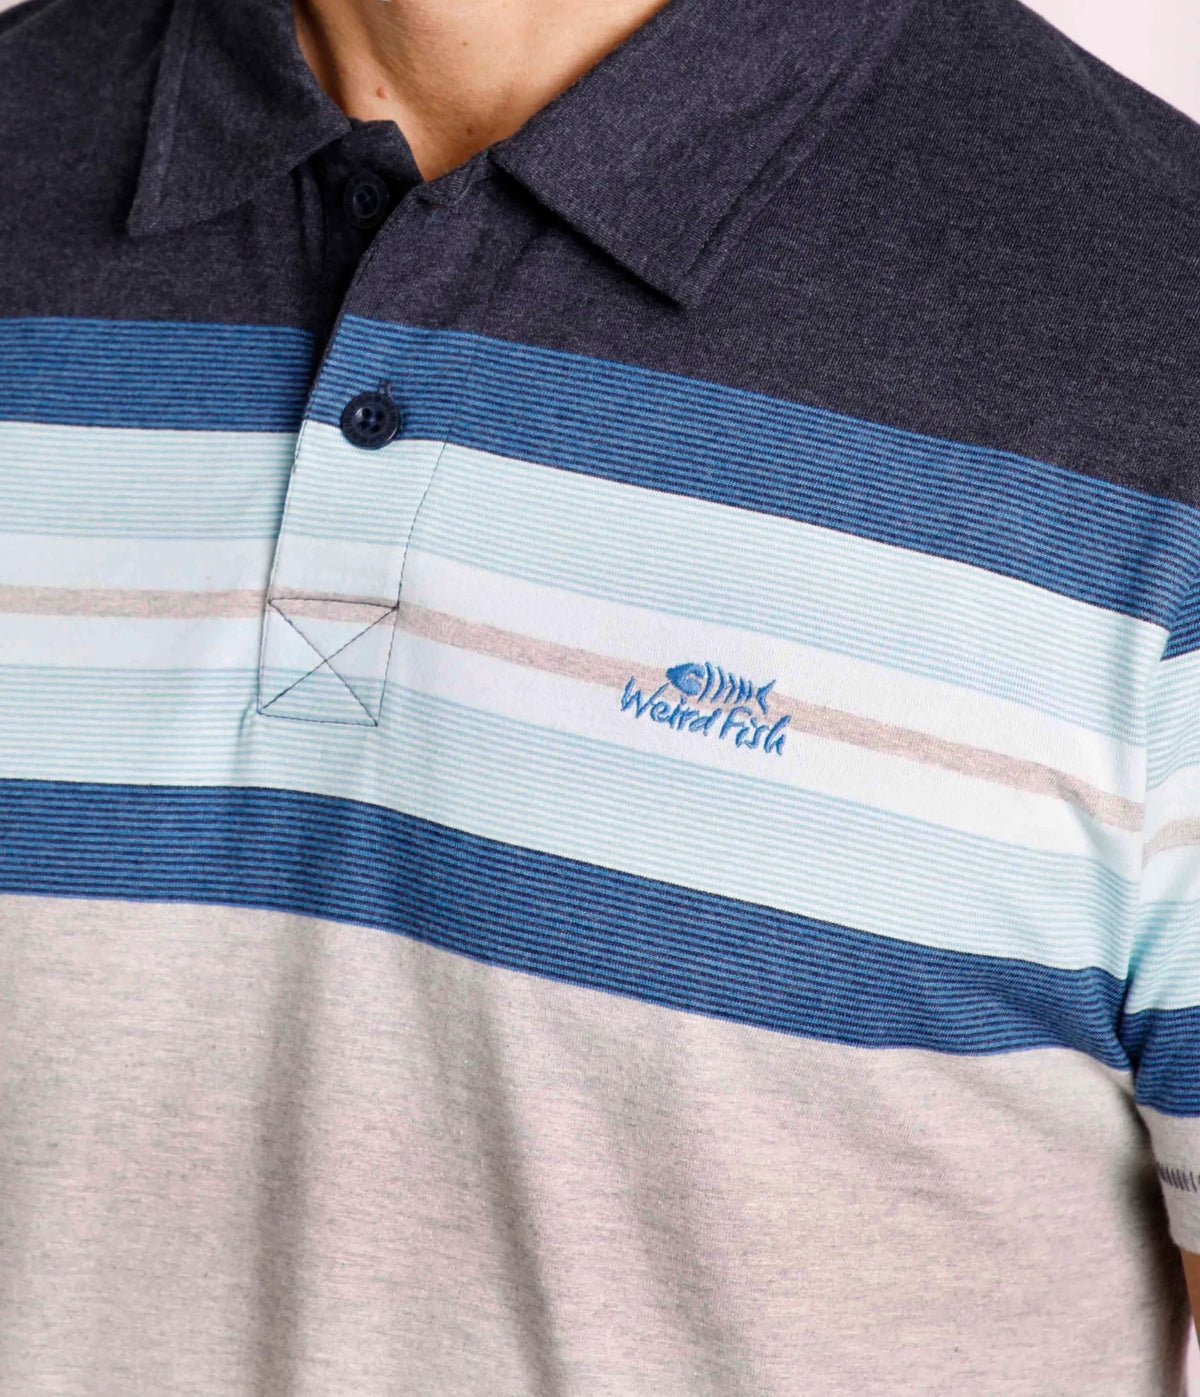 Men's Weird Fish short sleeve Albury style polo shirt from Weird Fish with chest stripes and button neckline in Sky Blue.